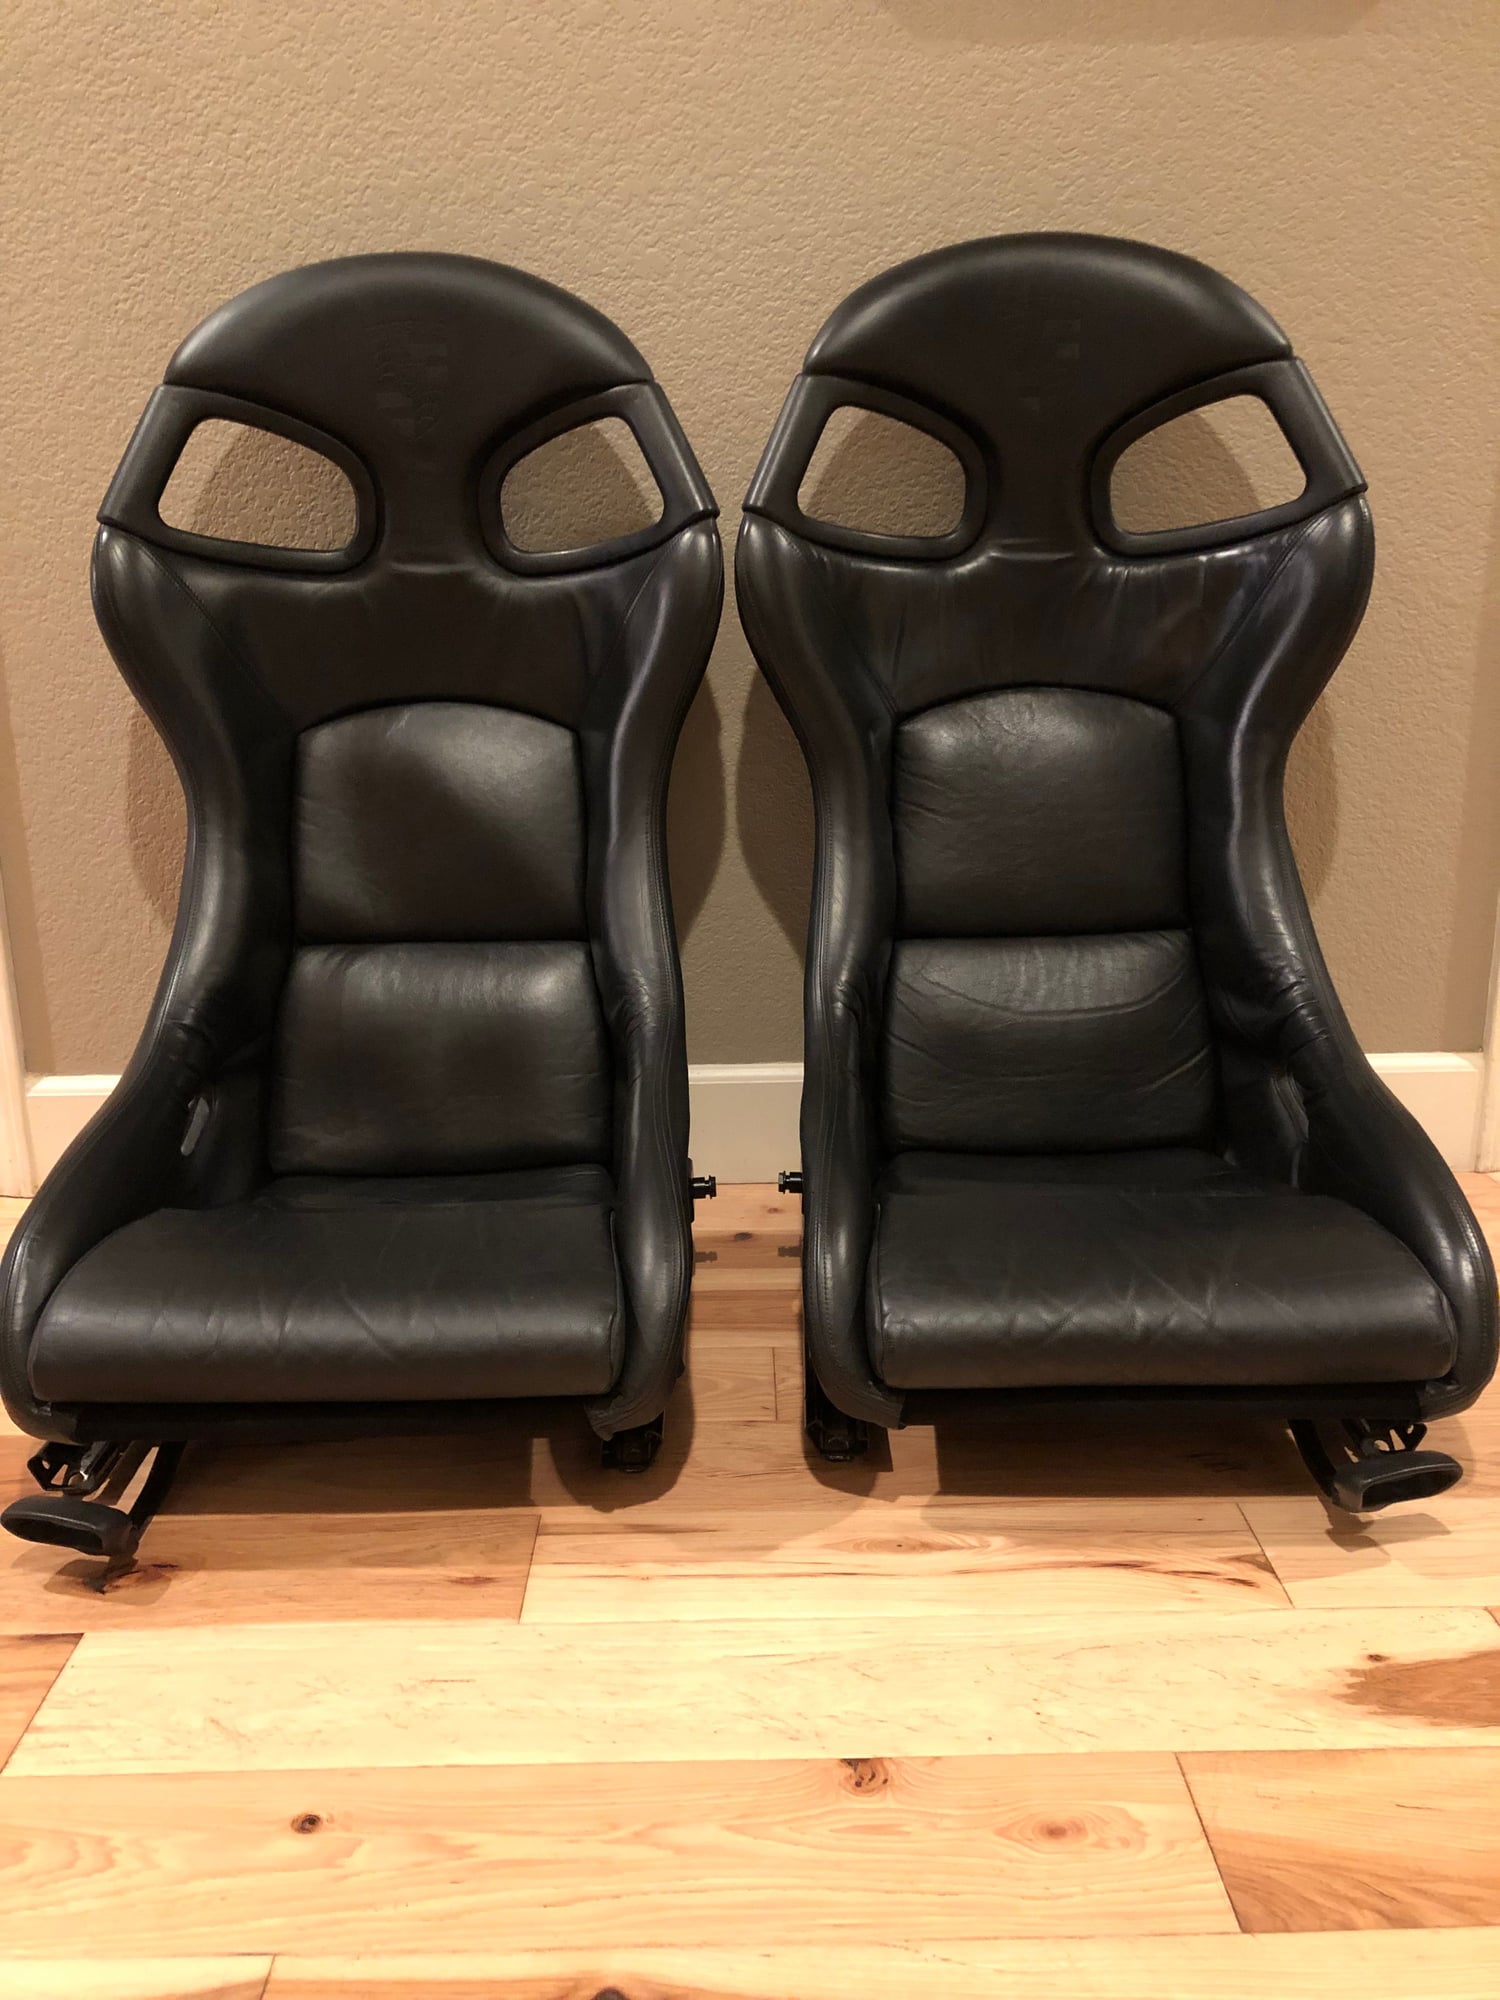 Interior/Upholstery - Recaro GT3 Black Leather Bucket Seats - Used - Livermore, CA 94550, United States